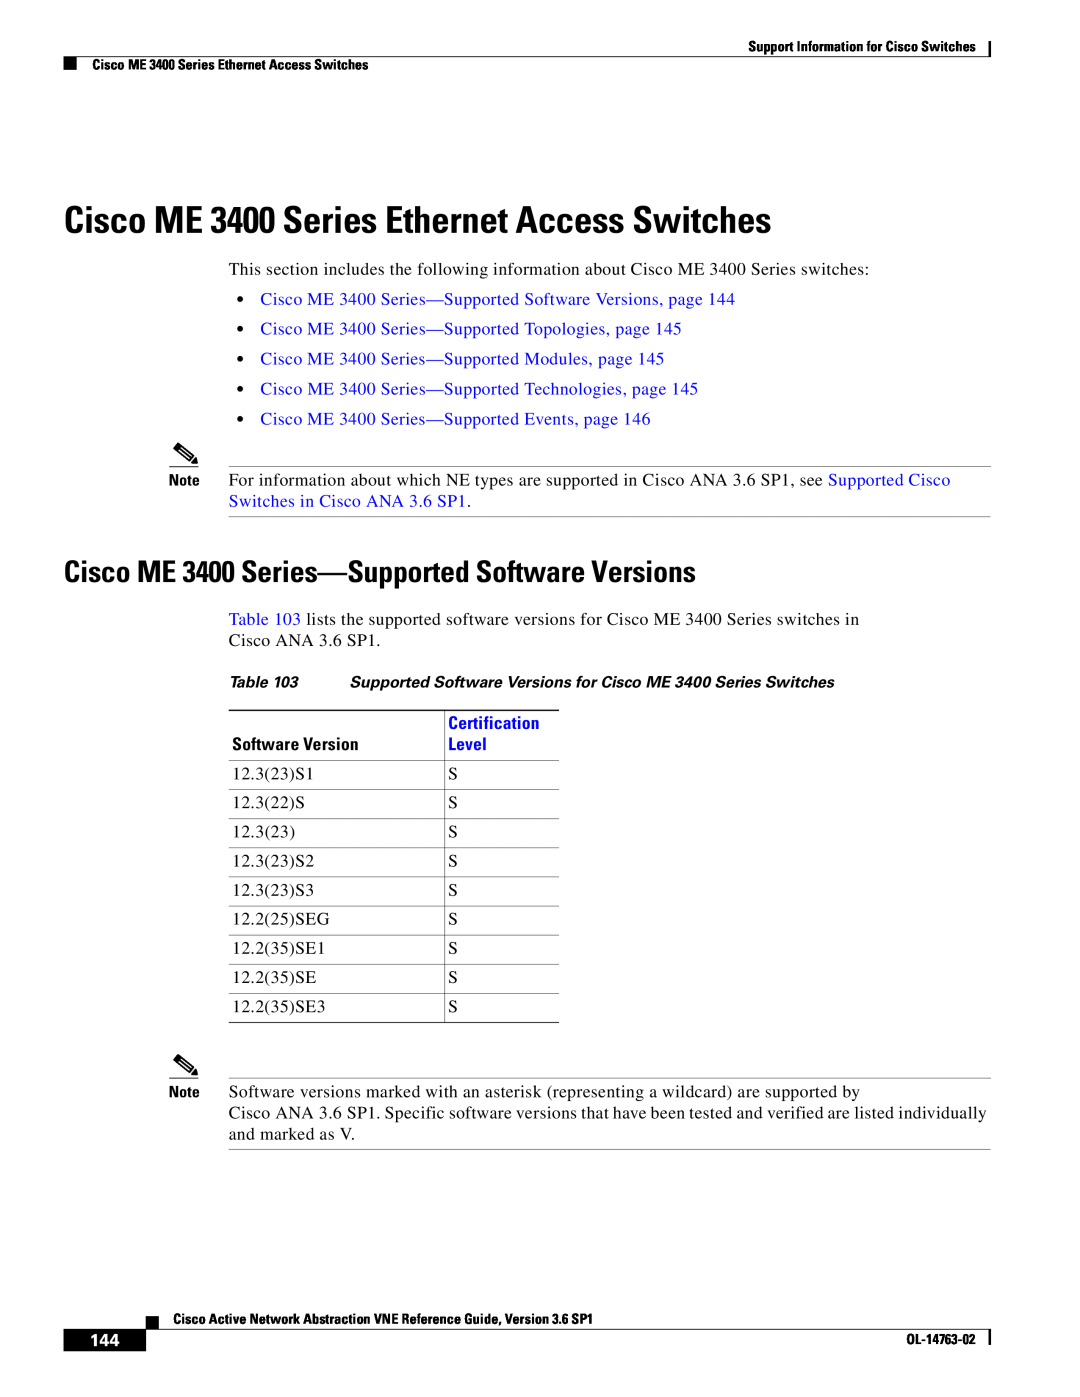 Cisco Systems OL-14763-02 Cisco ME 3400 Series Ethernet Access Switches, Cisco ME 3400 Series-Supported Software Versions 